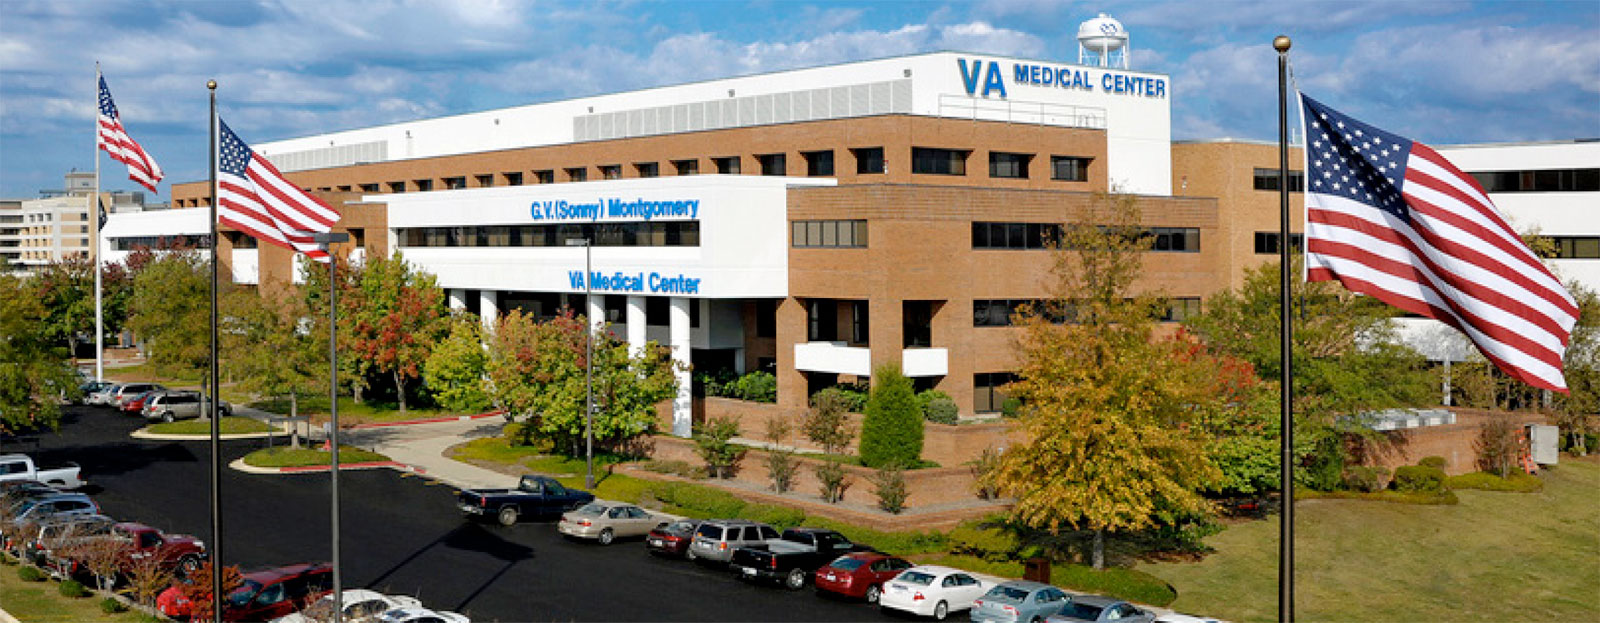 Department of Veterans Administration, Human Resources Building